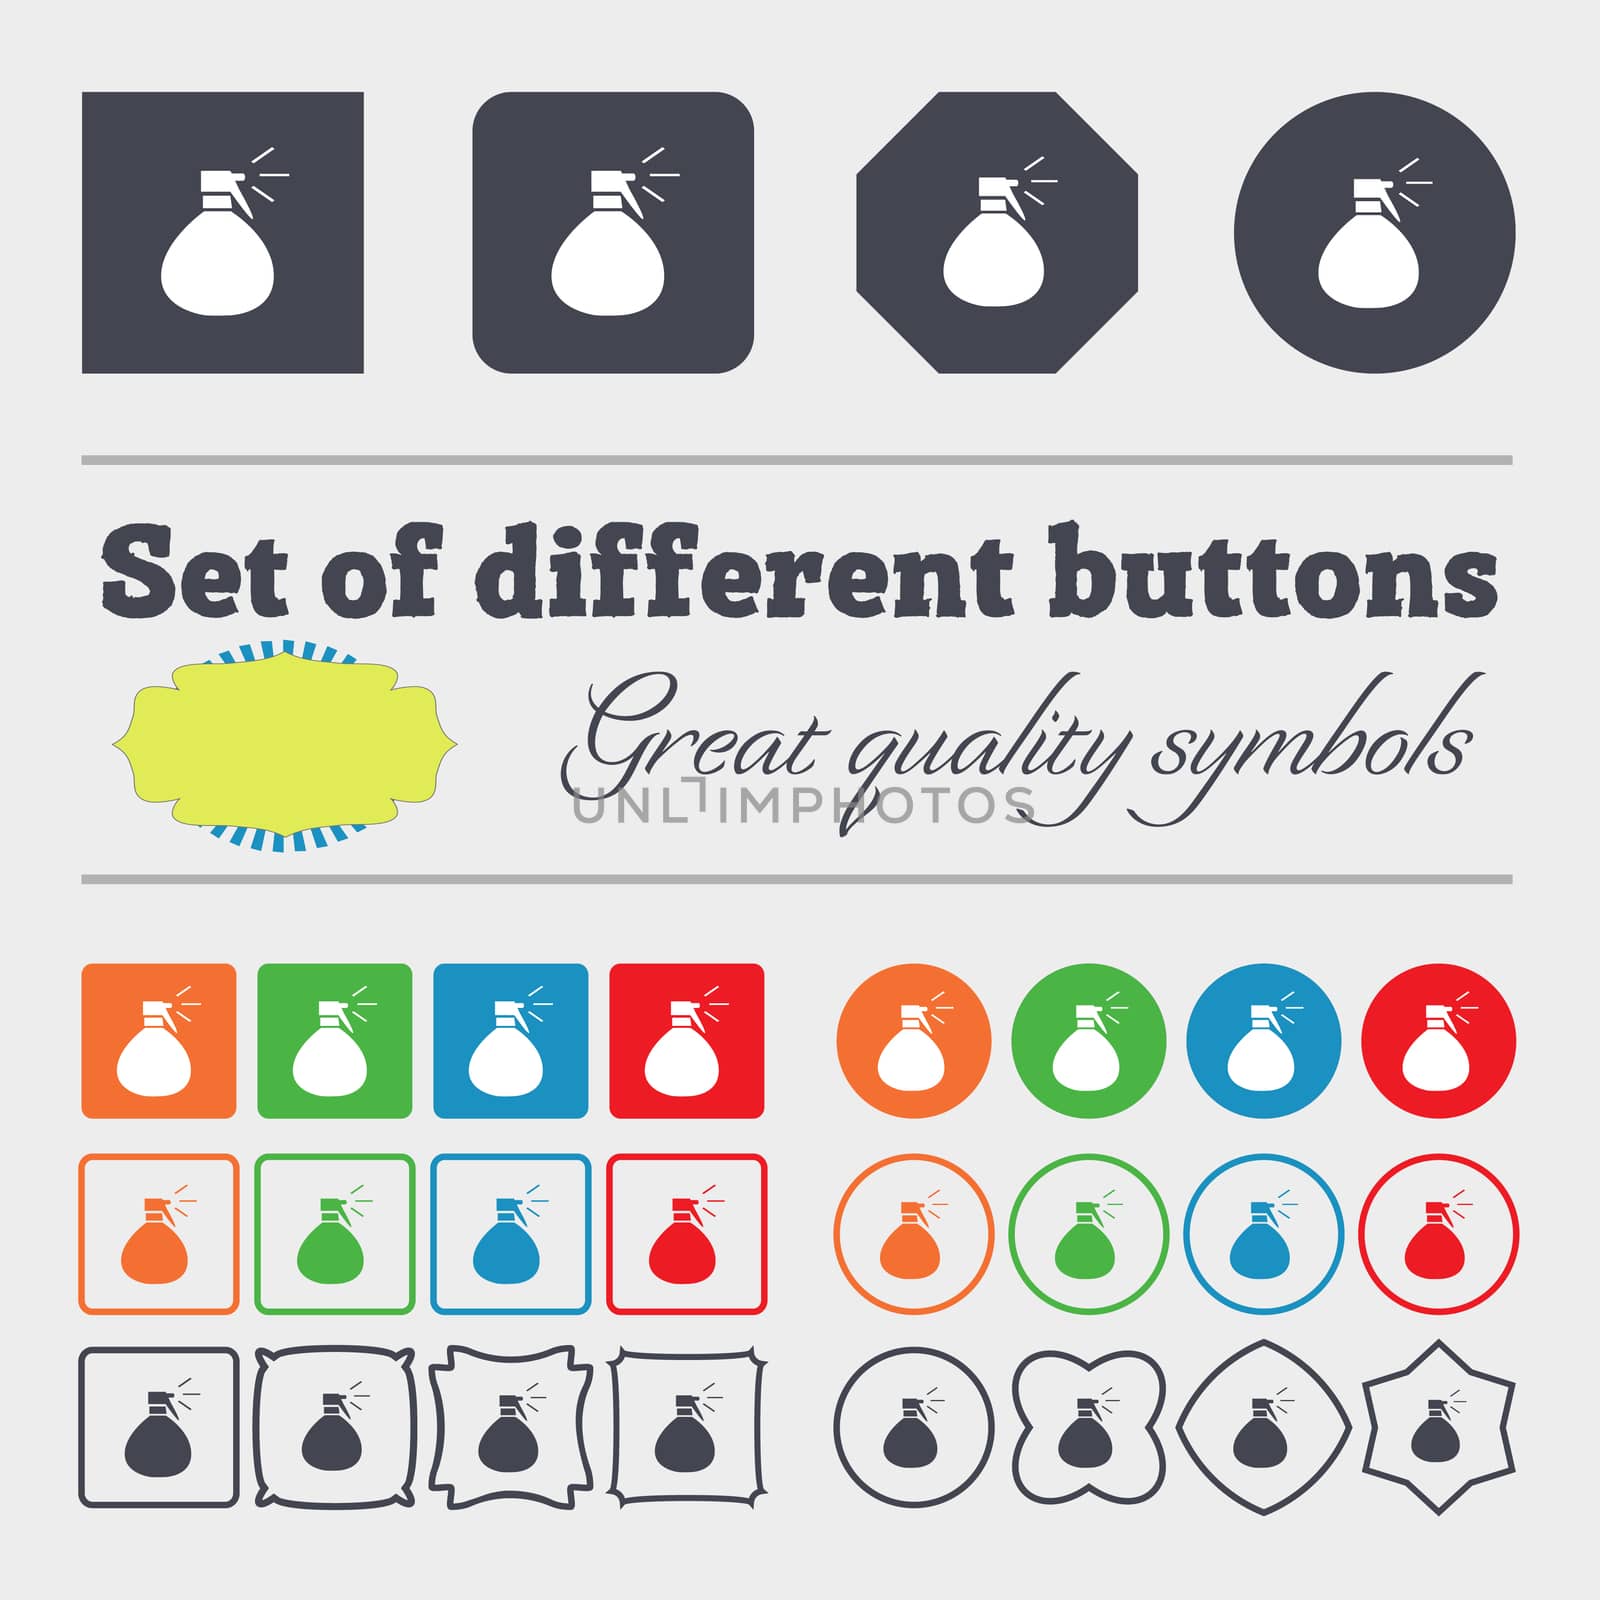 plastic spray of water icon sign. Big set of colorful, diverse, high-quality buttons. illustration